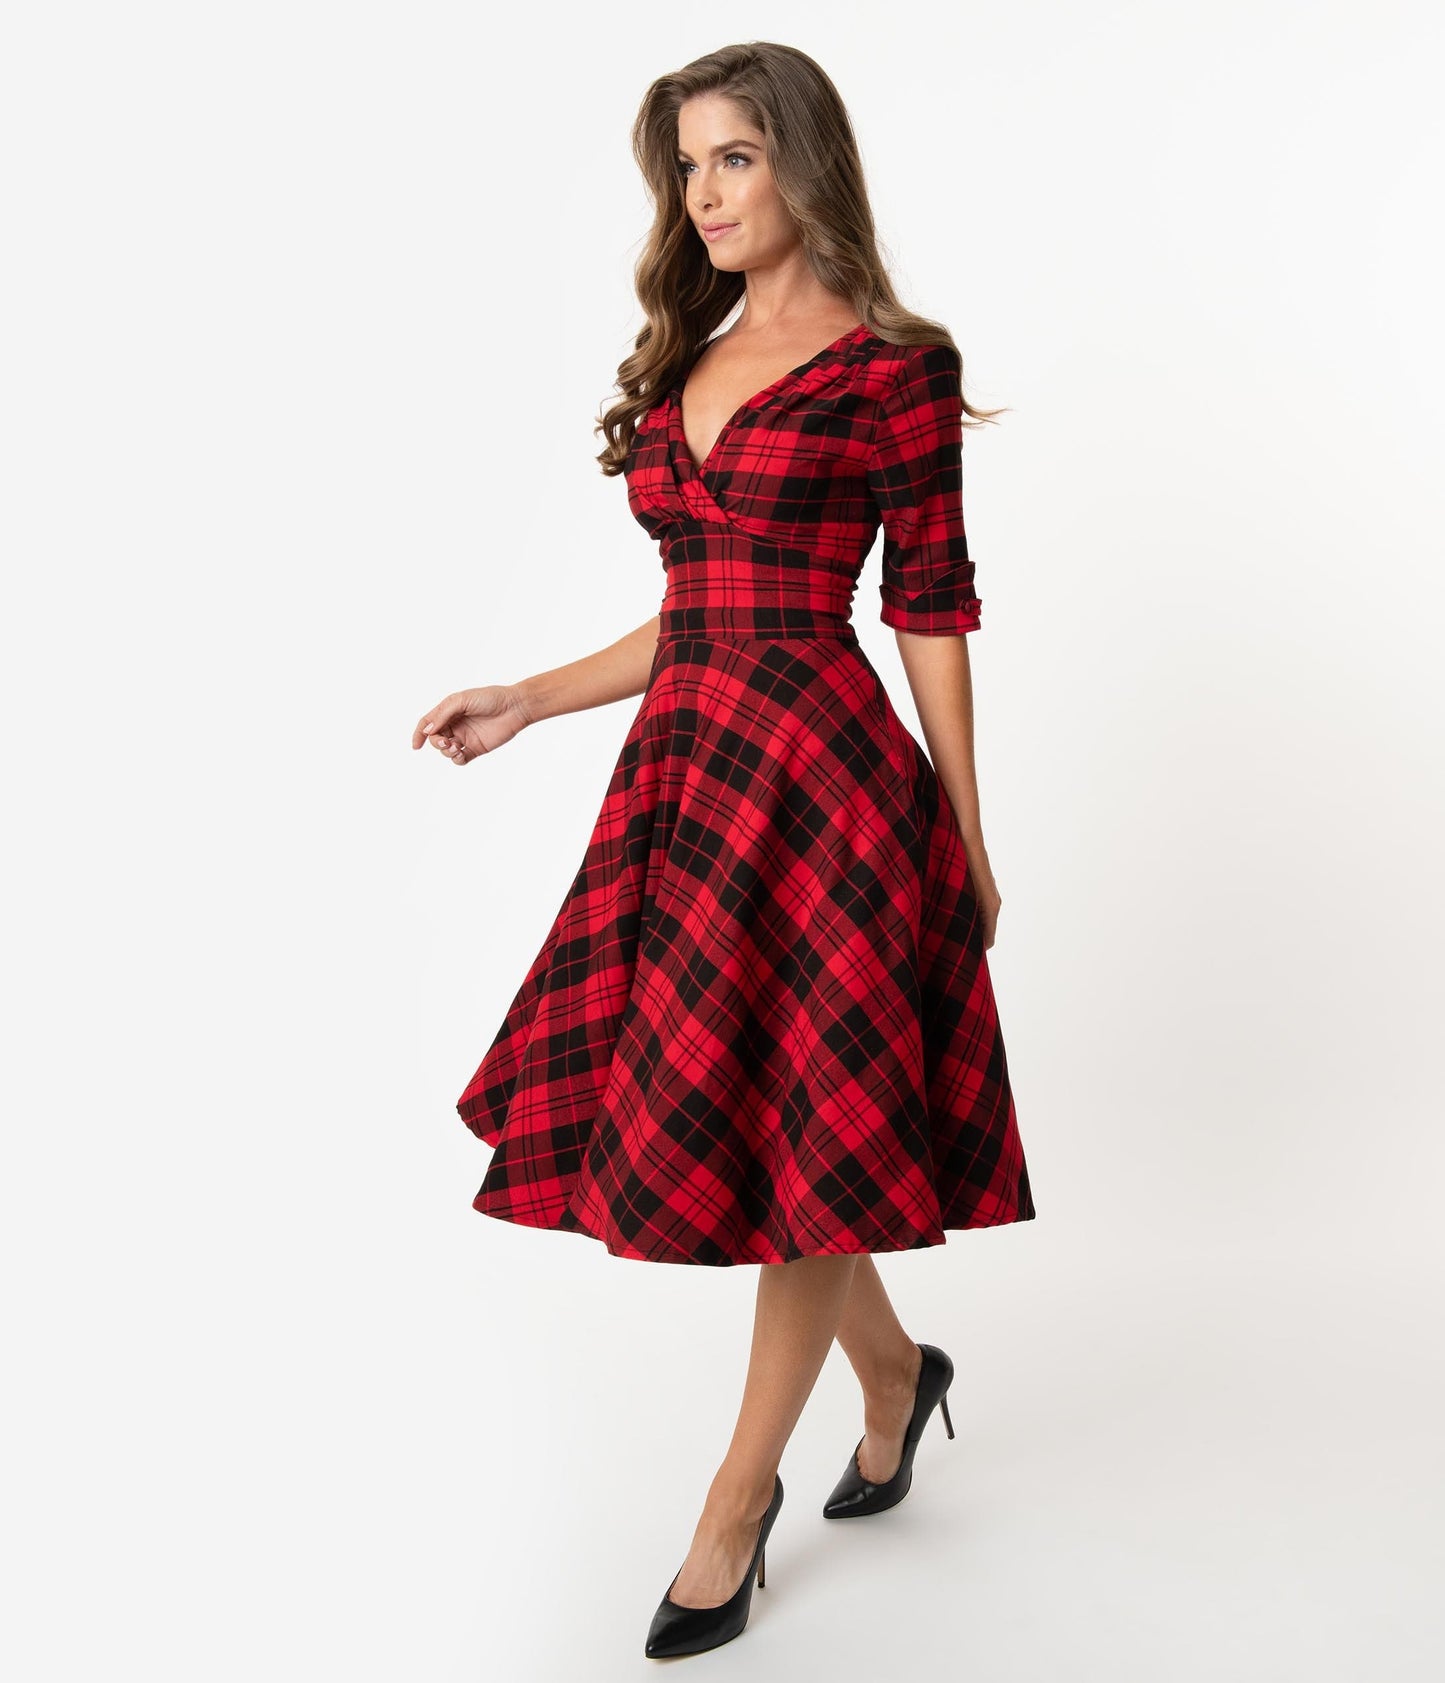 Unique Vintage 1950s Red & Black Plaid Delores Swing Dress with Sleeves